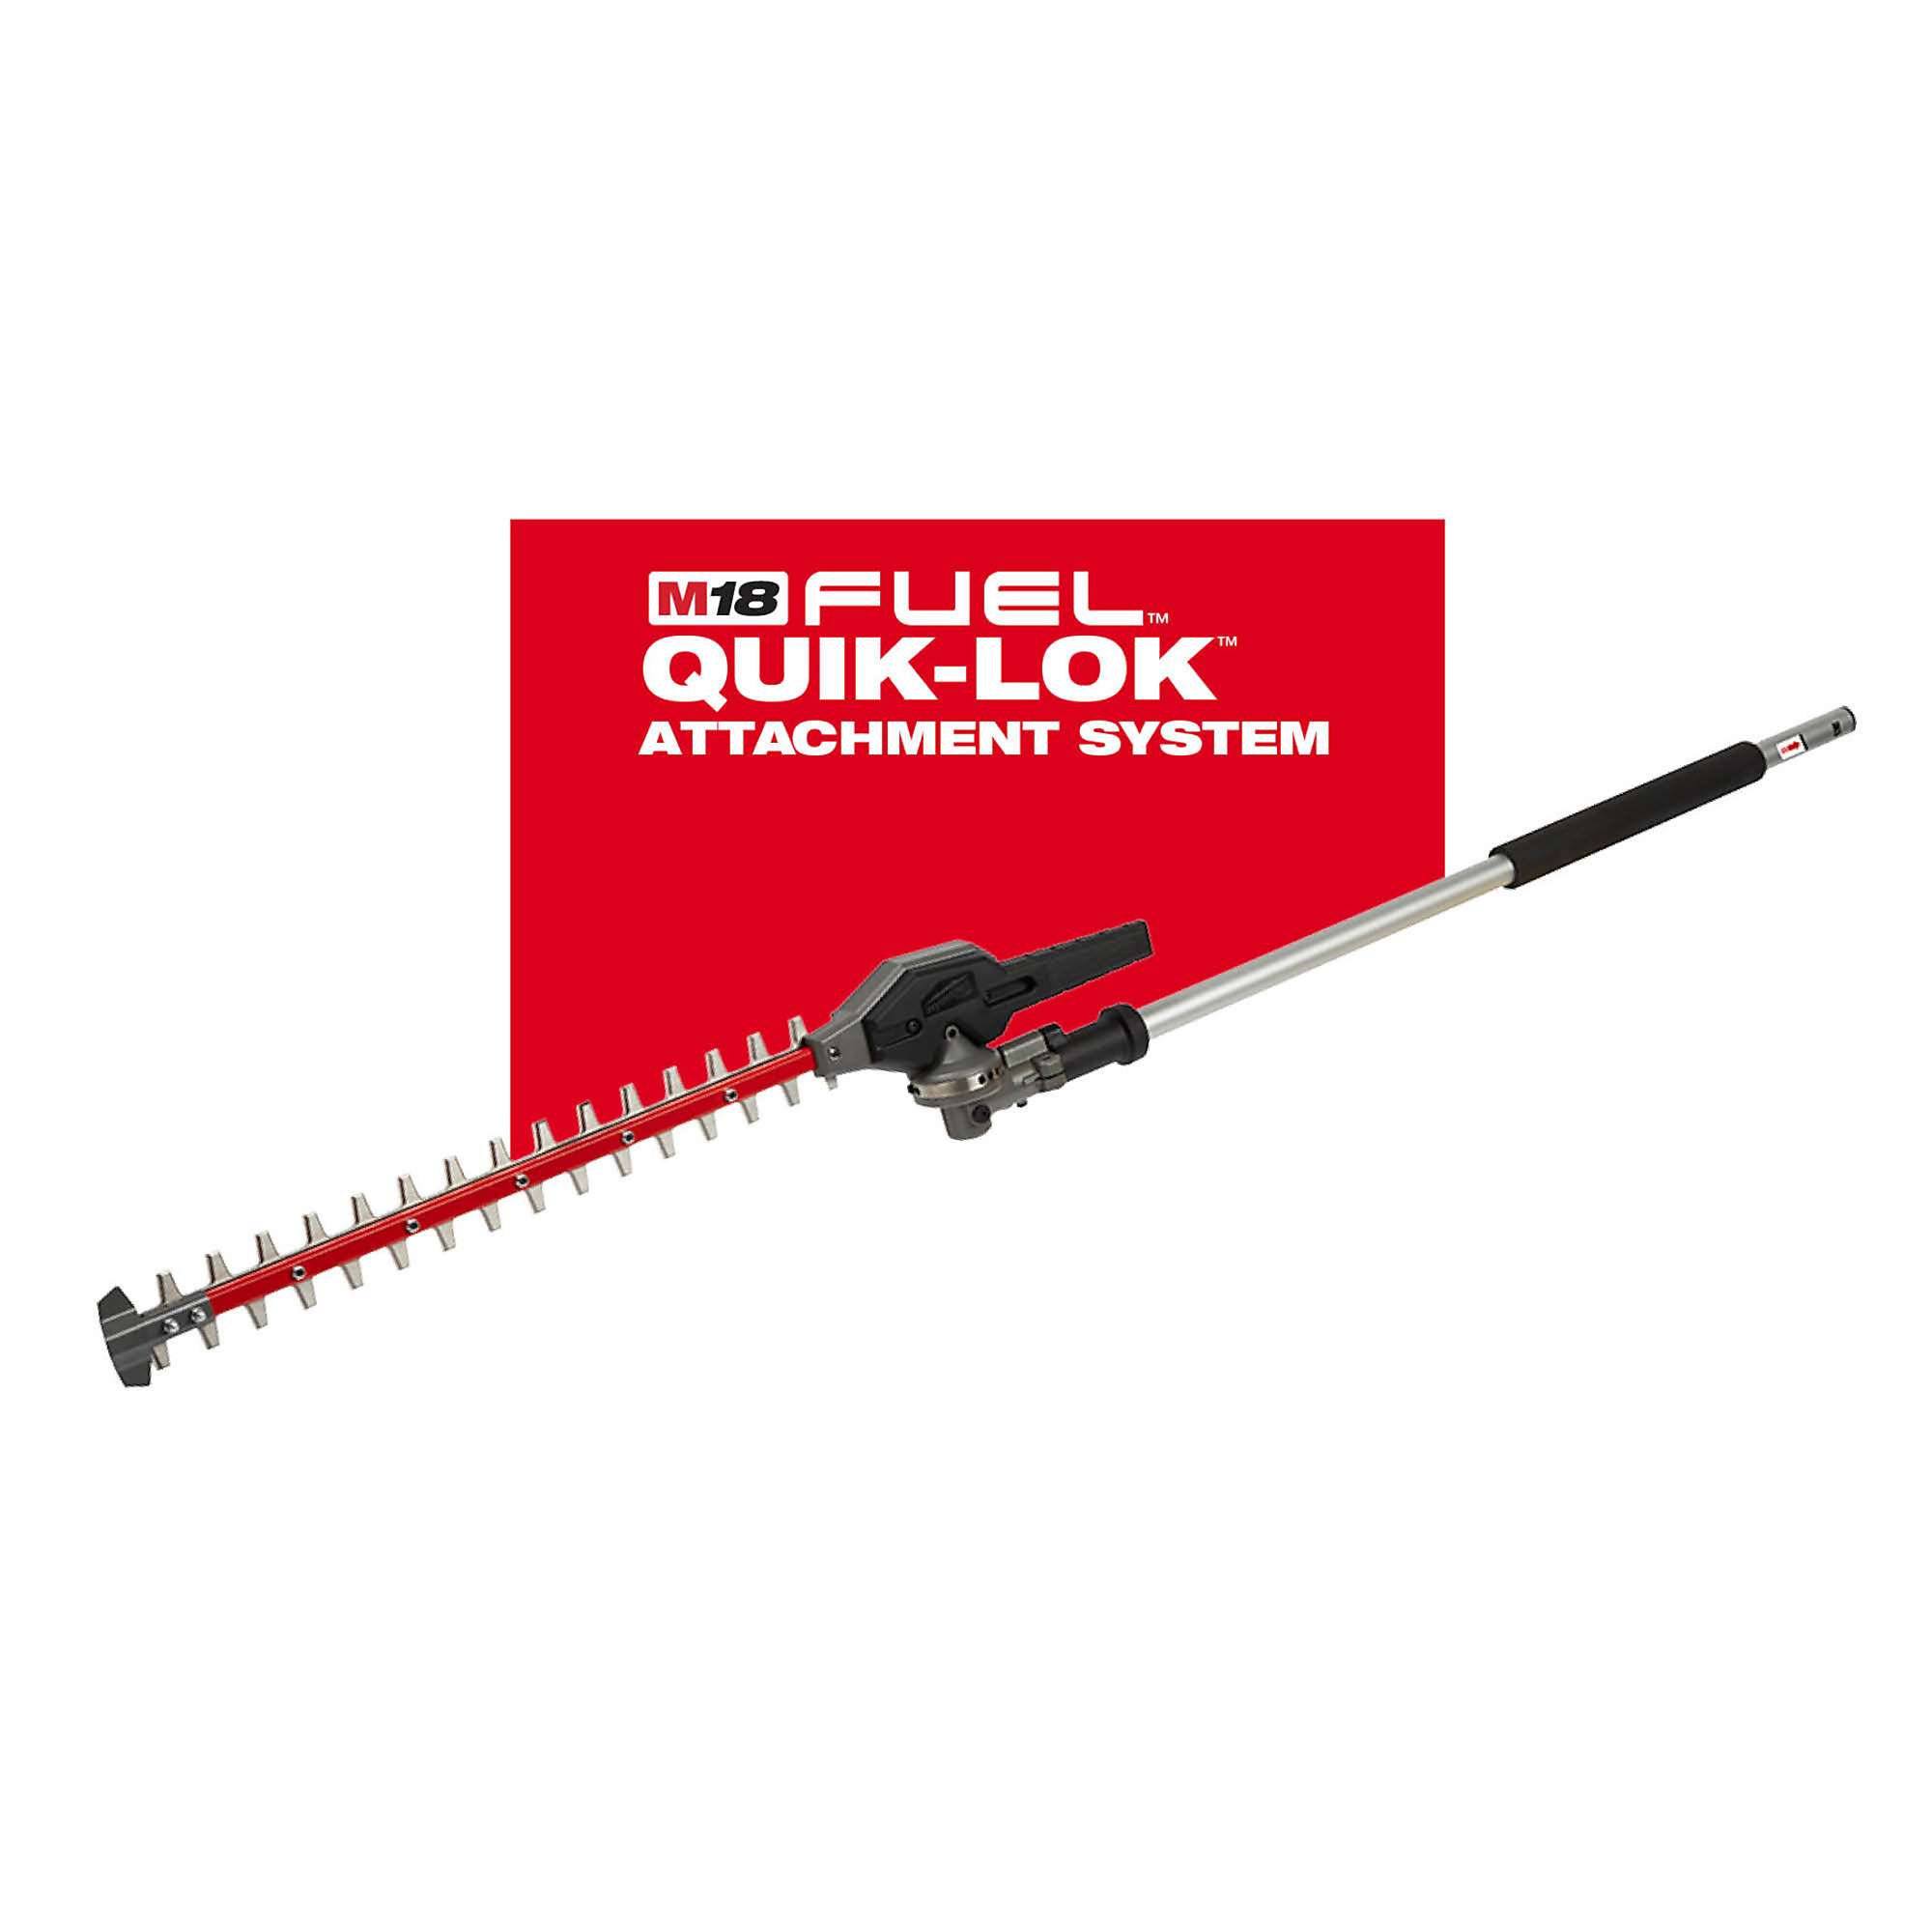 Objector Forkæle symaskine Milwaukee M18 Fuel QUIK-LOK Articulating Hedge Trimmer Attachment —  49-16-2719 | Northern Tool